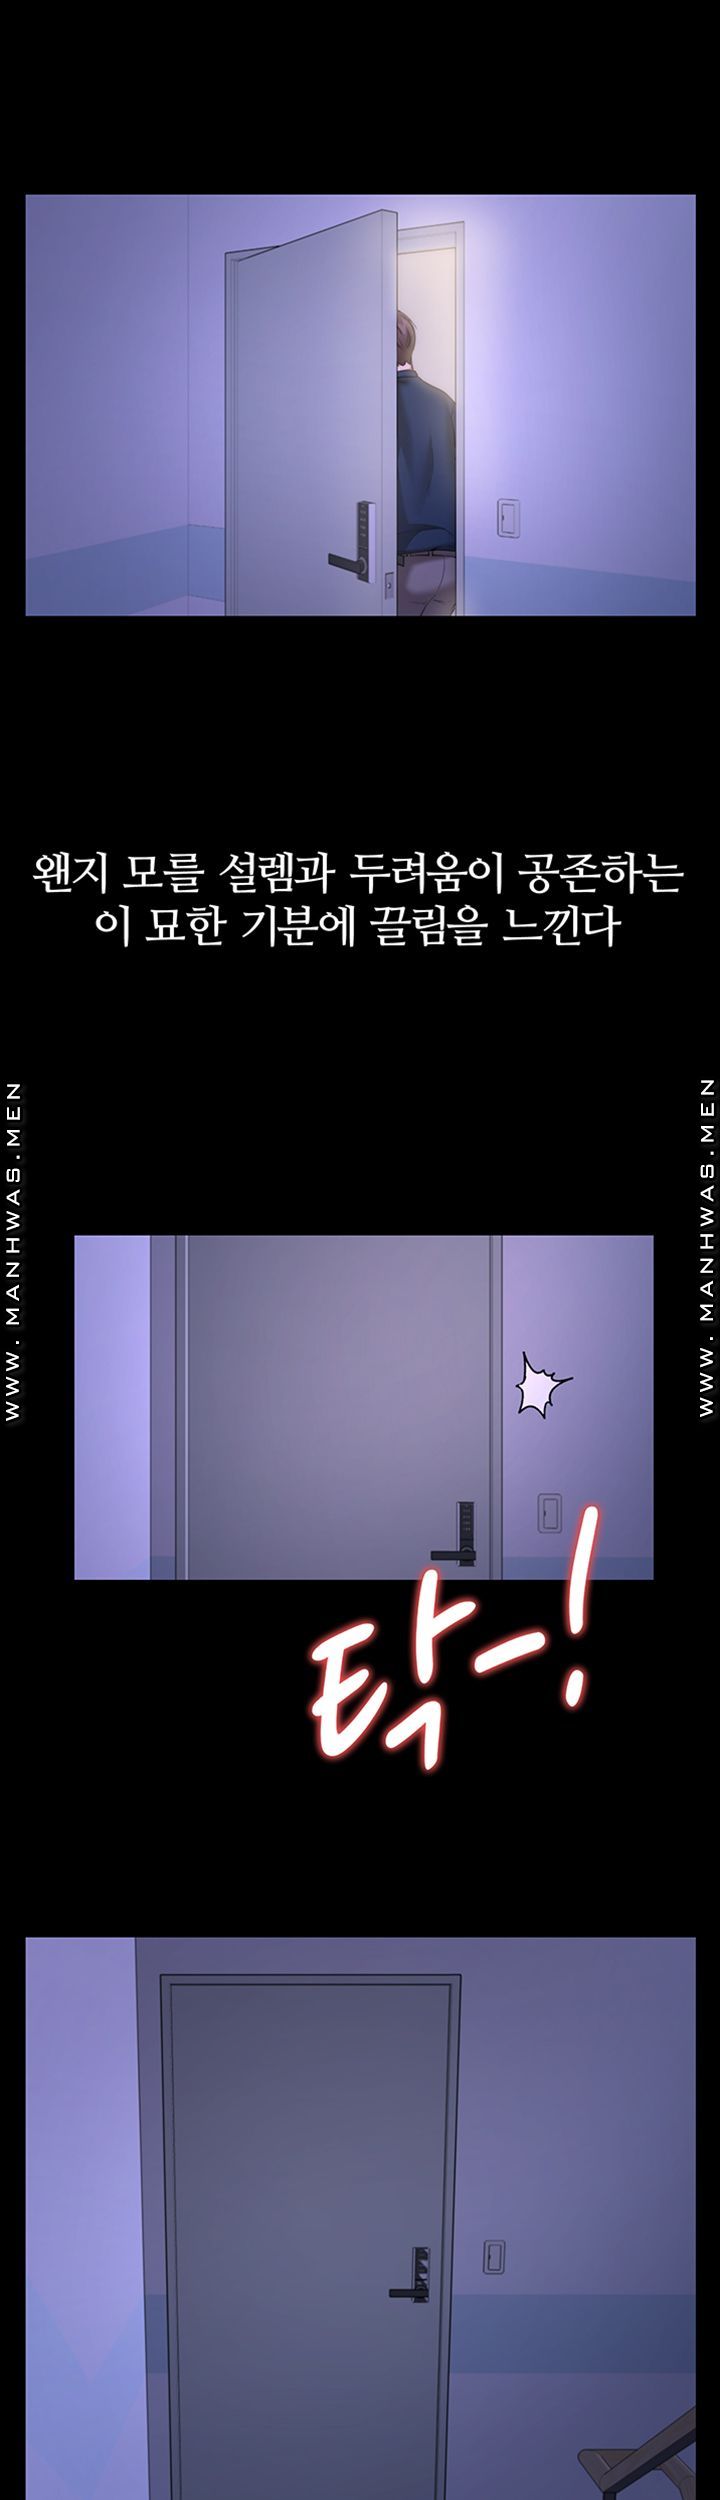 Different Dream Raw - Chapter 10 Page 50